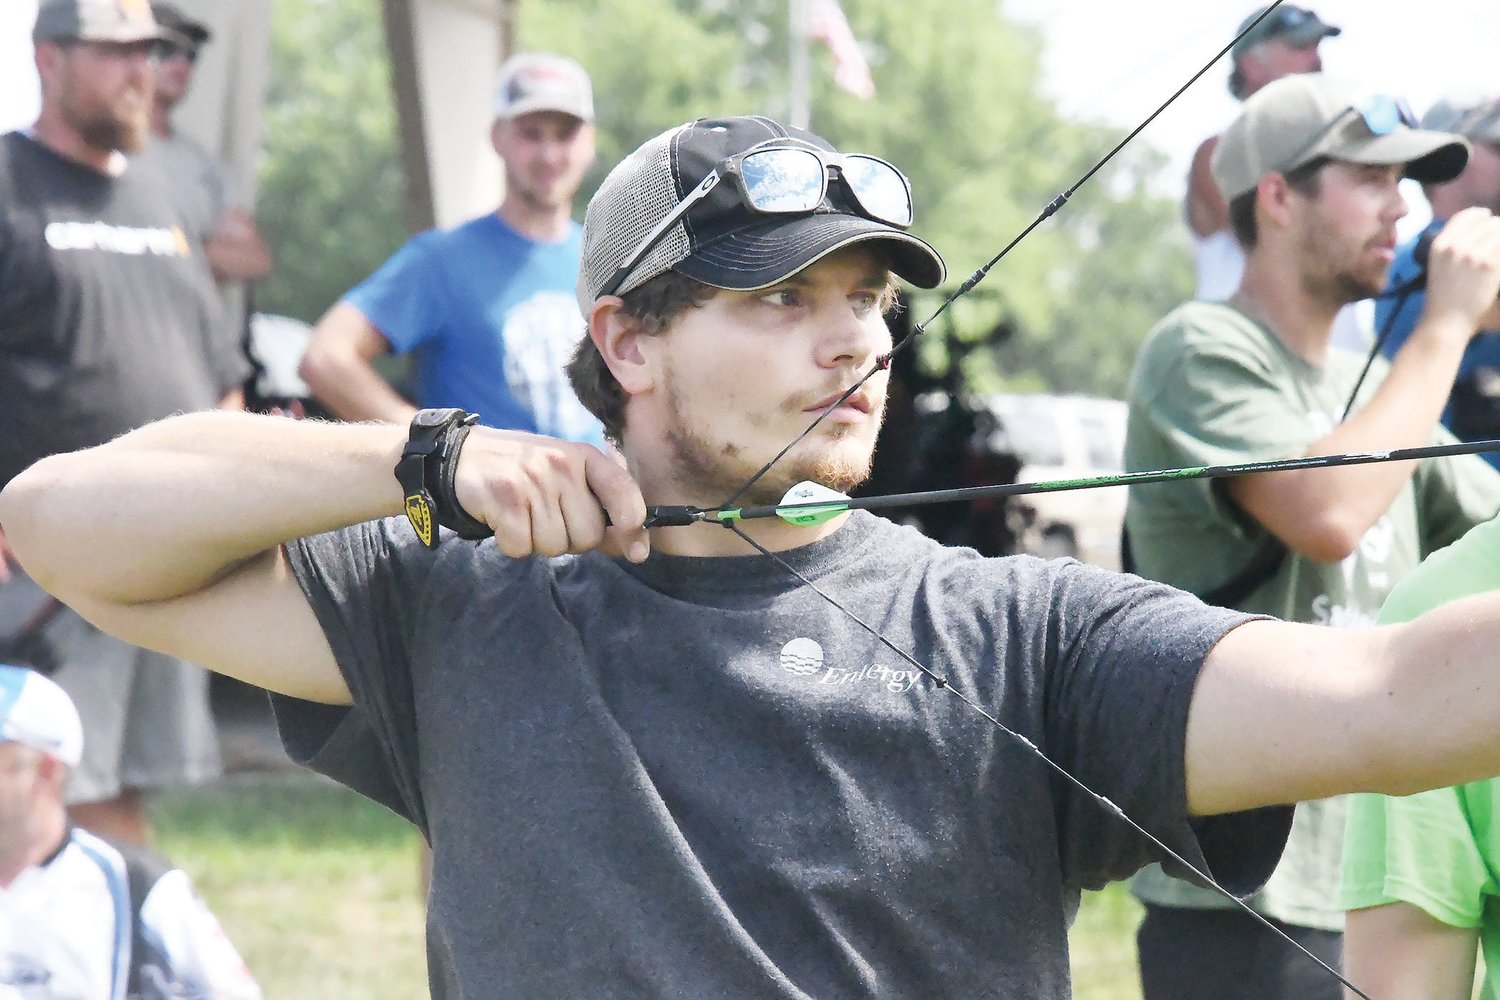 Fulton archer Seth Jennings aims for a foam ring during the Badlands Iron Buck competition on Sunday afternoon as part of the R100 Shoot National Archery Tour.